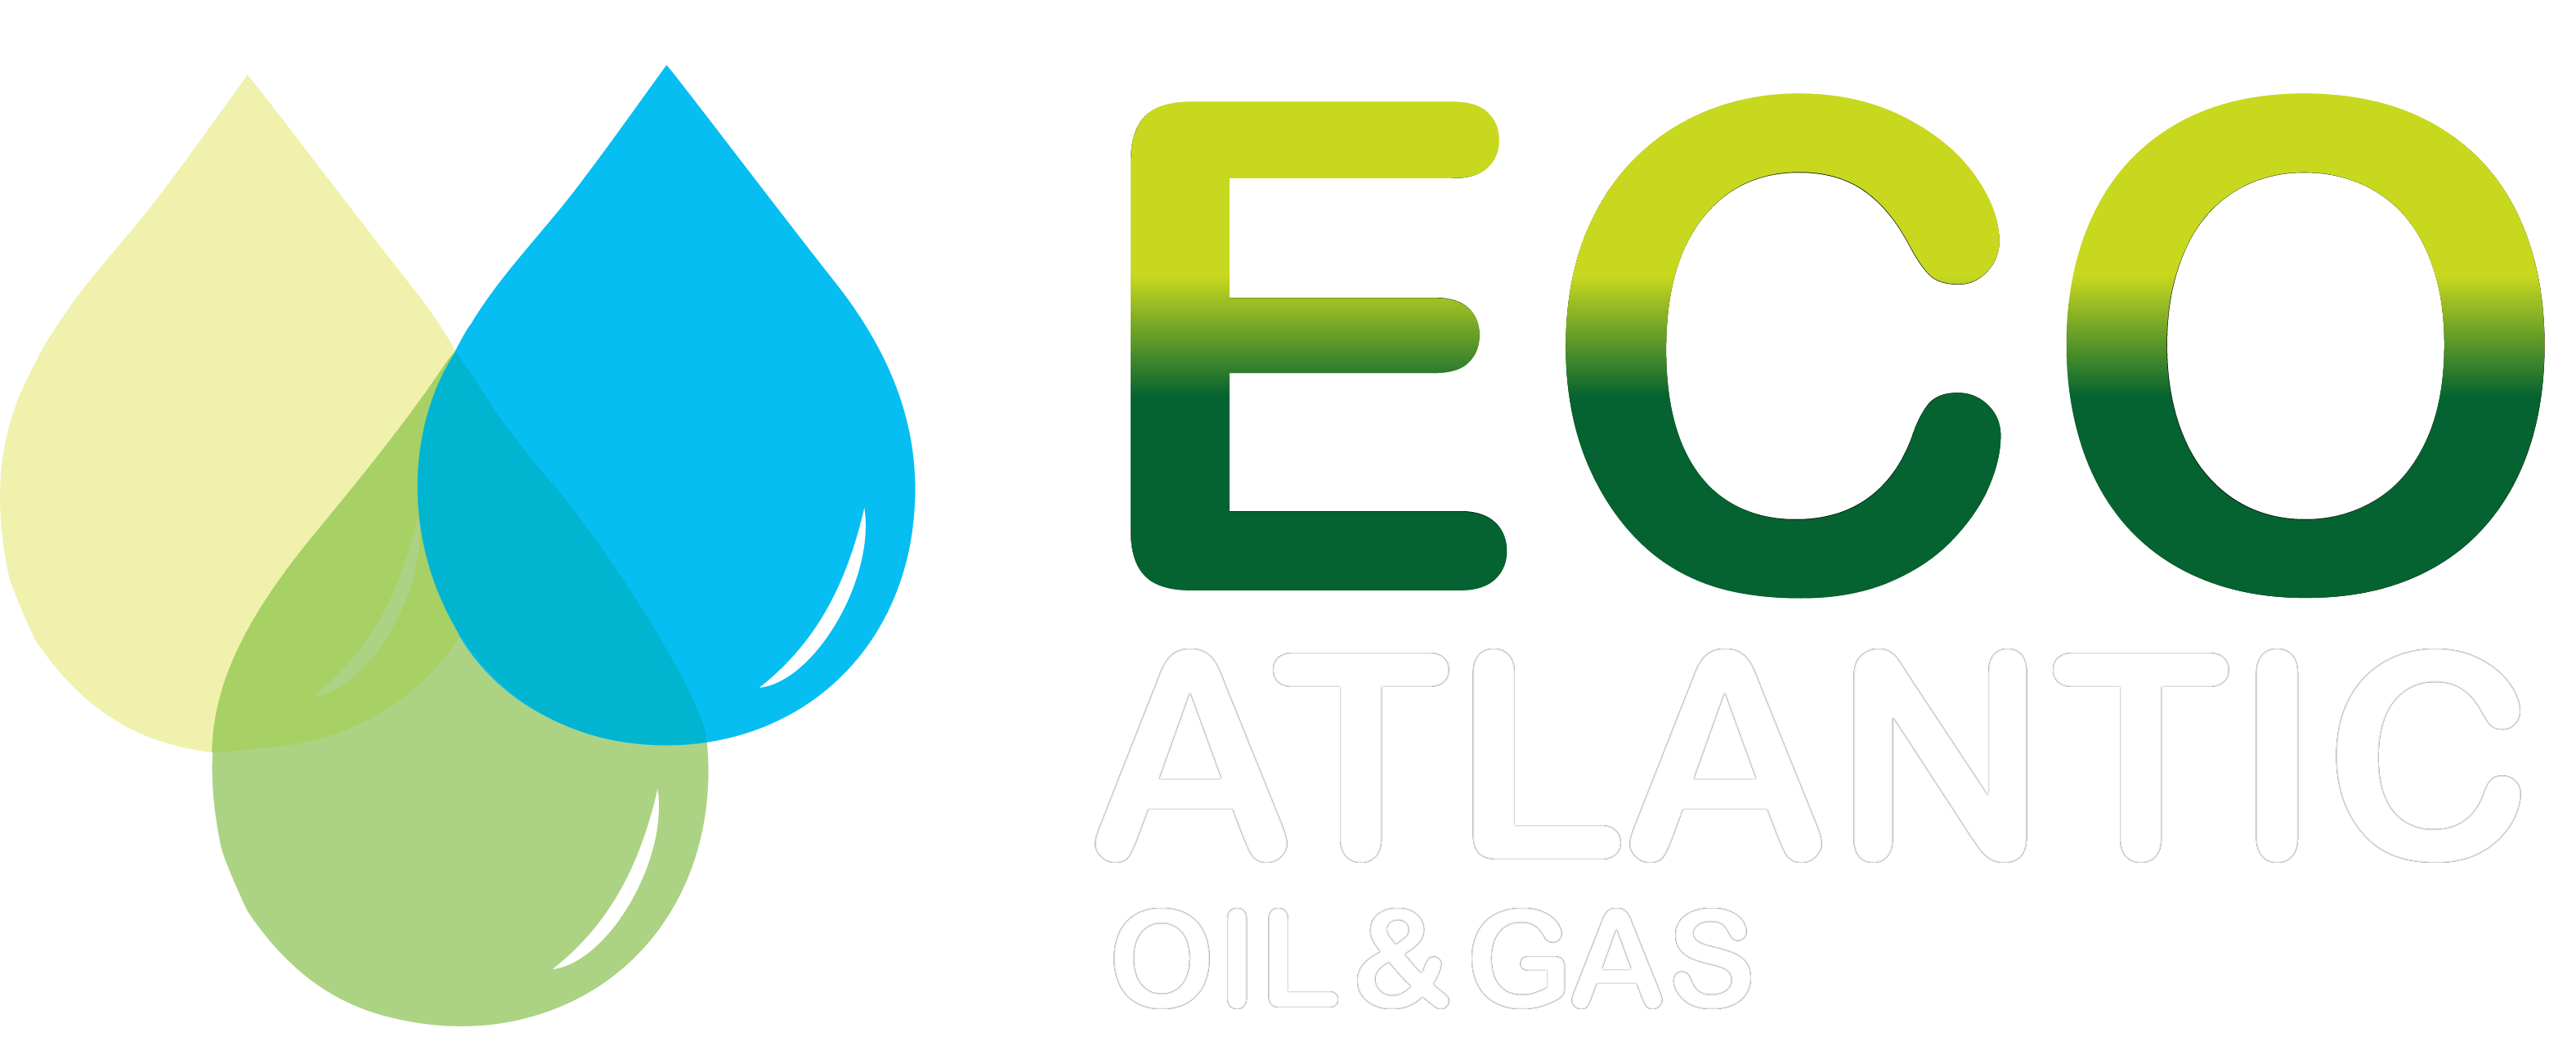 Oil and Gas Logo - Homepage - Eco (Atlantic) Oil & Gas Plc